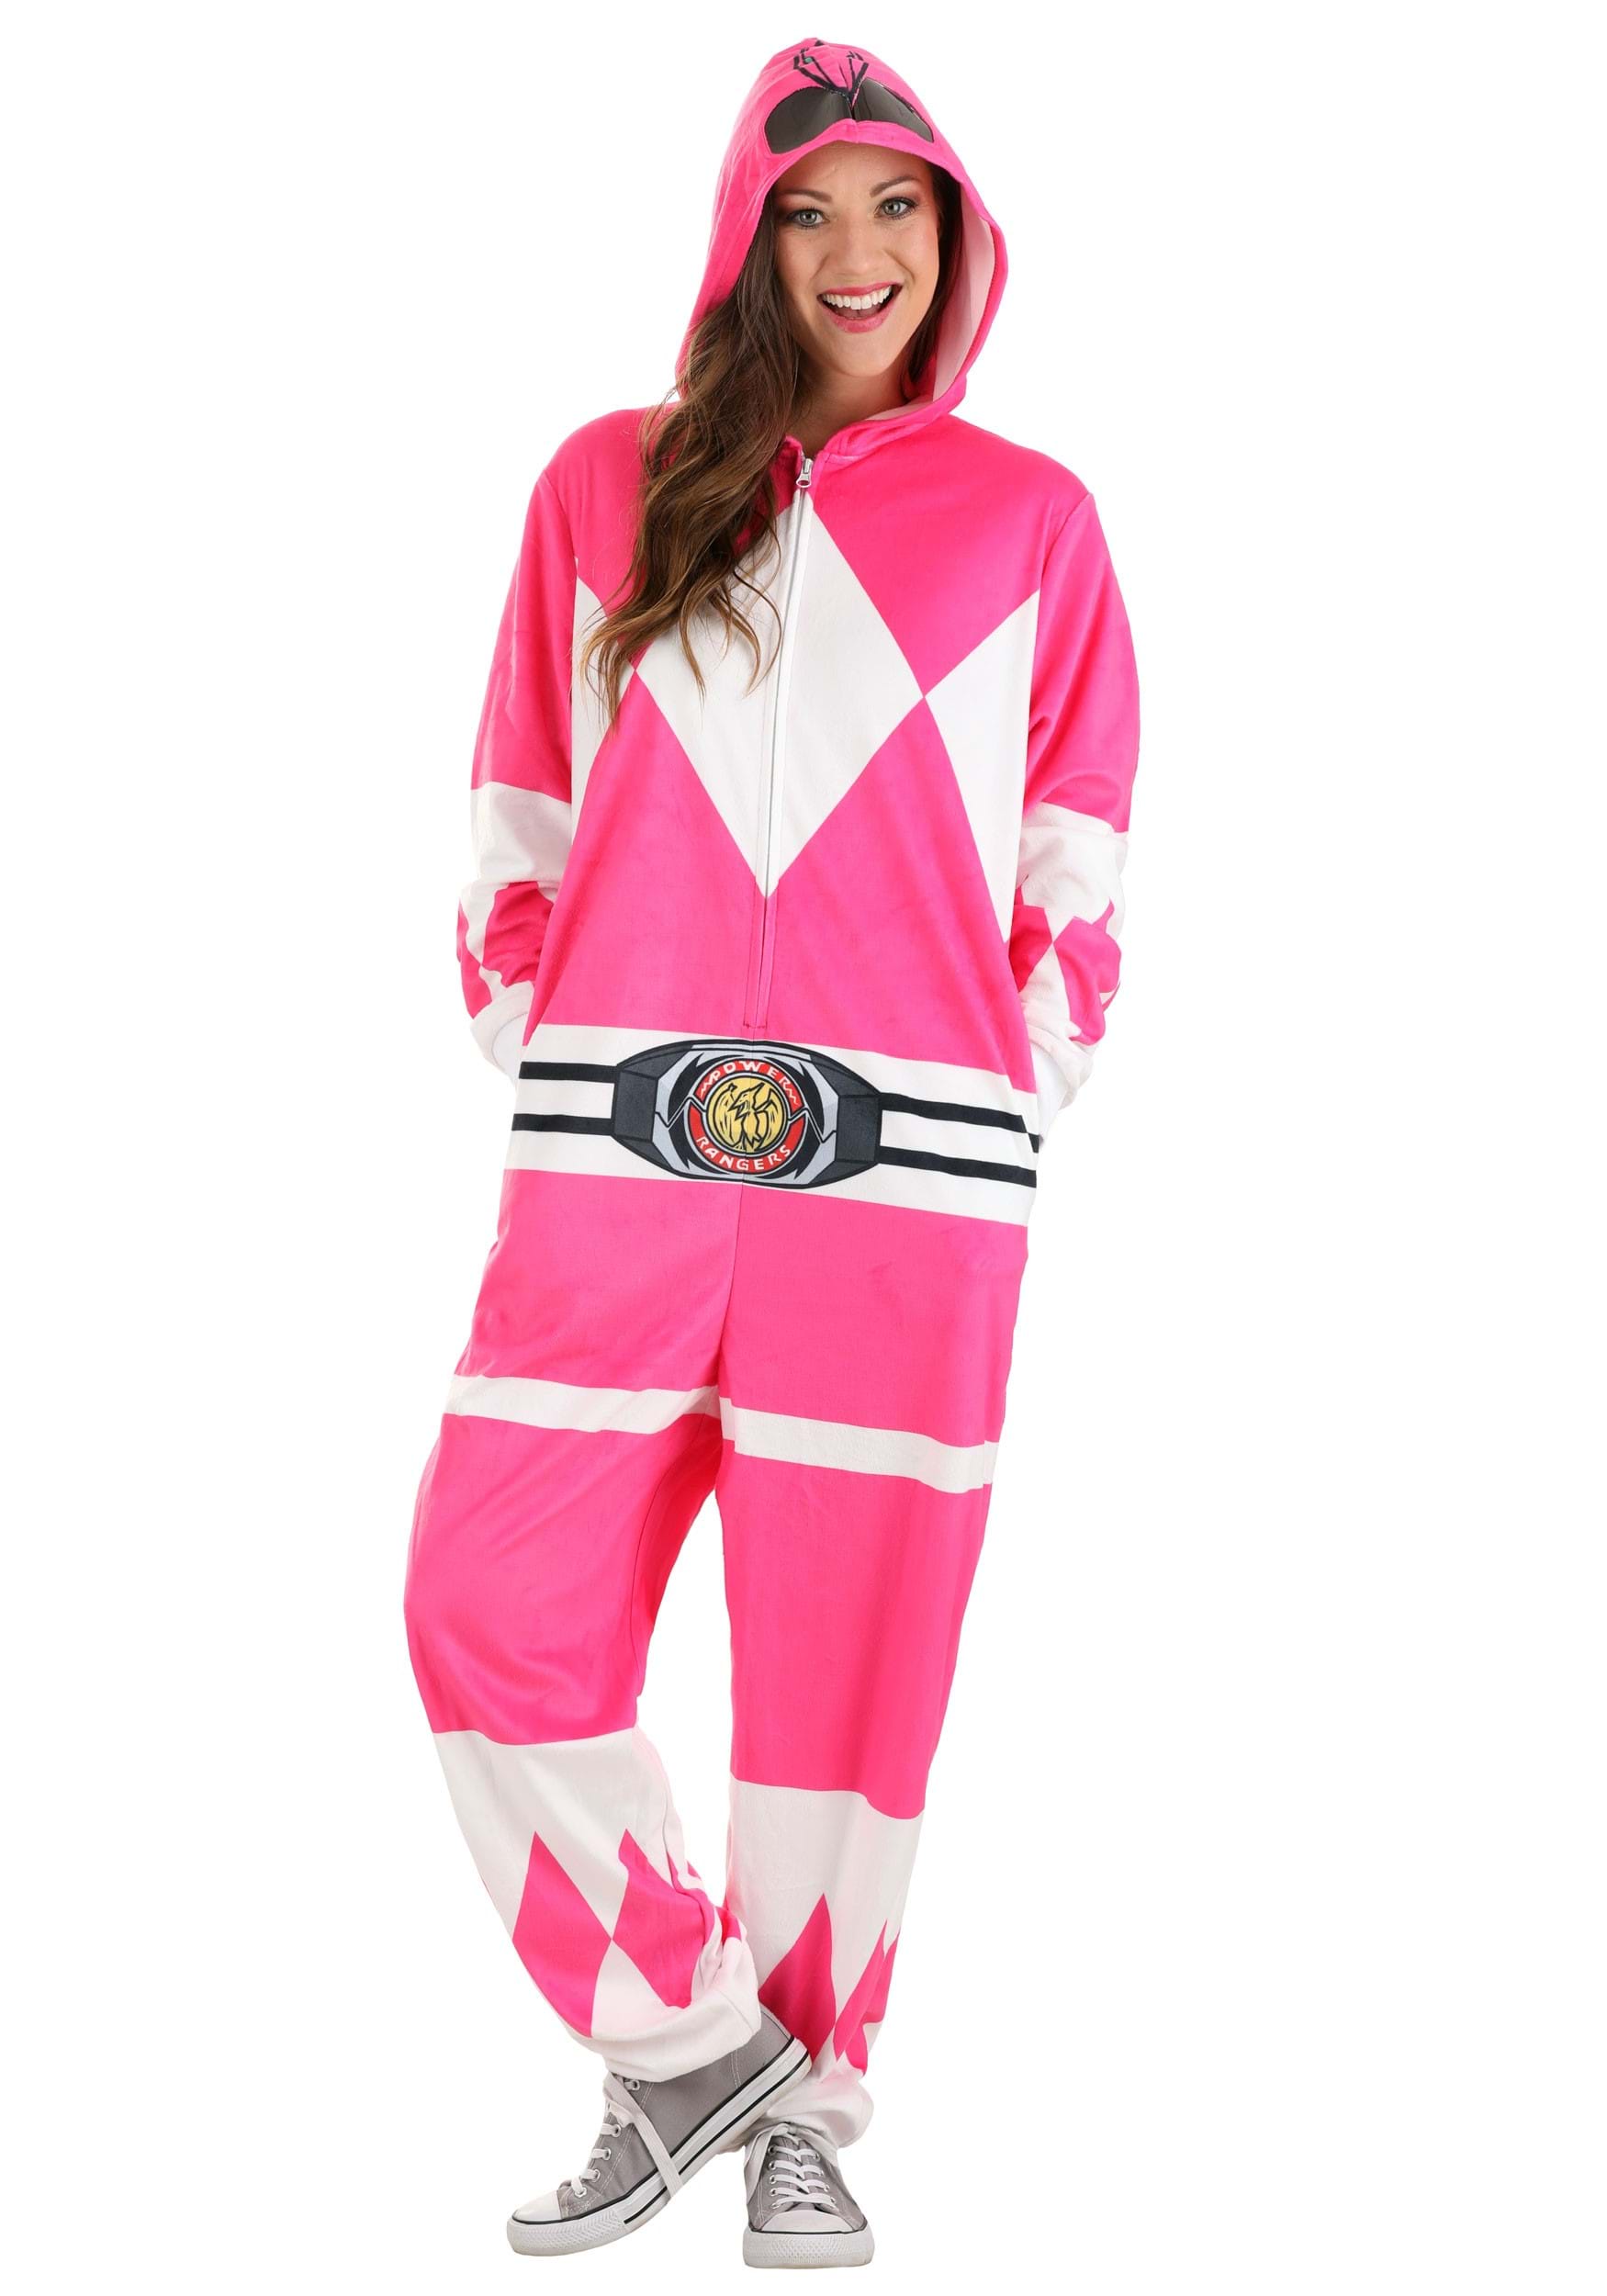 https://images.fun.com/products/87265/1-1/power-rangers-pink-ranger-hooded-union-suit.jpg